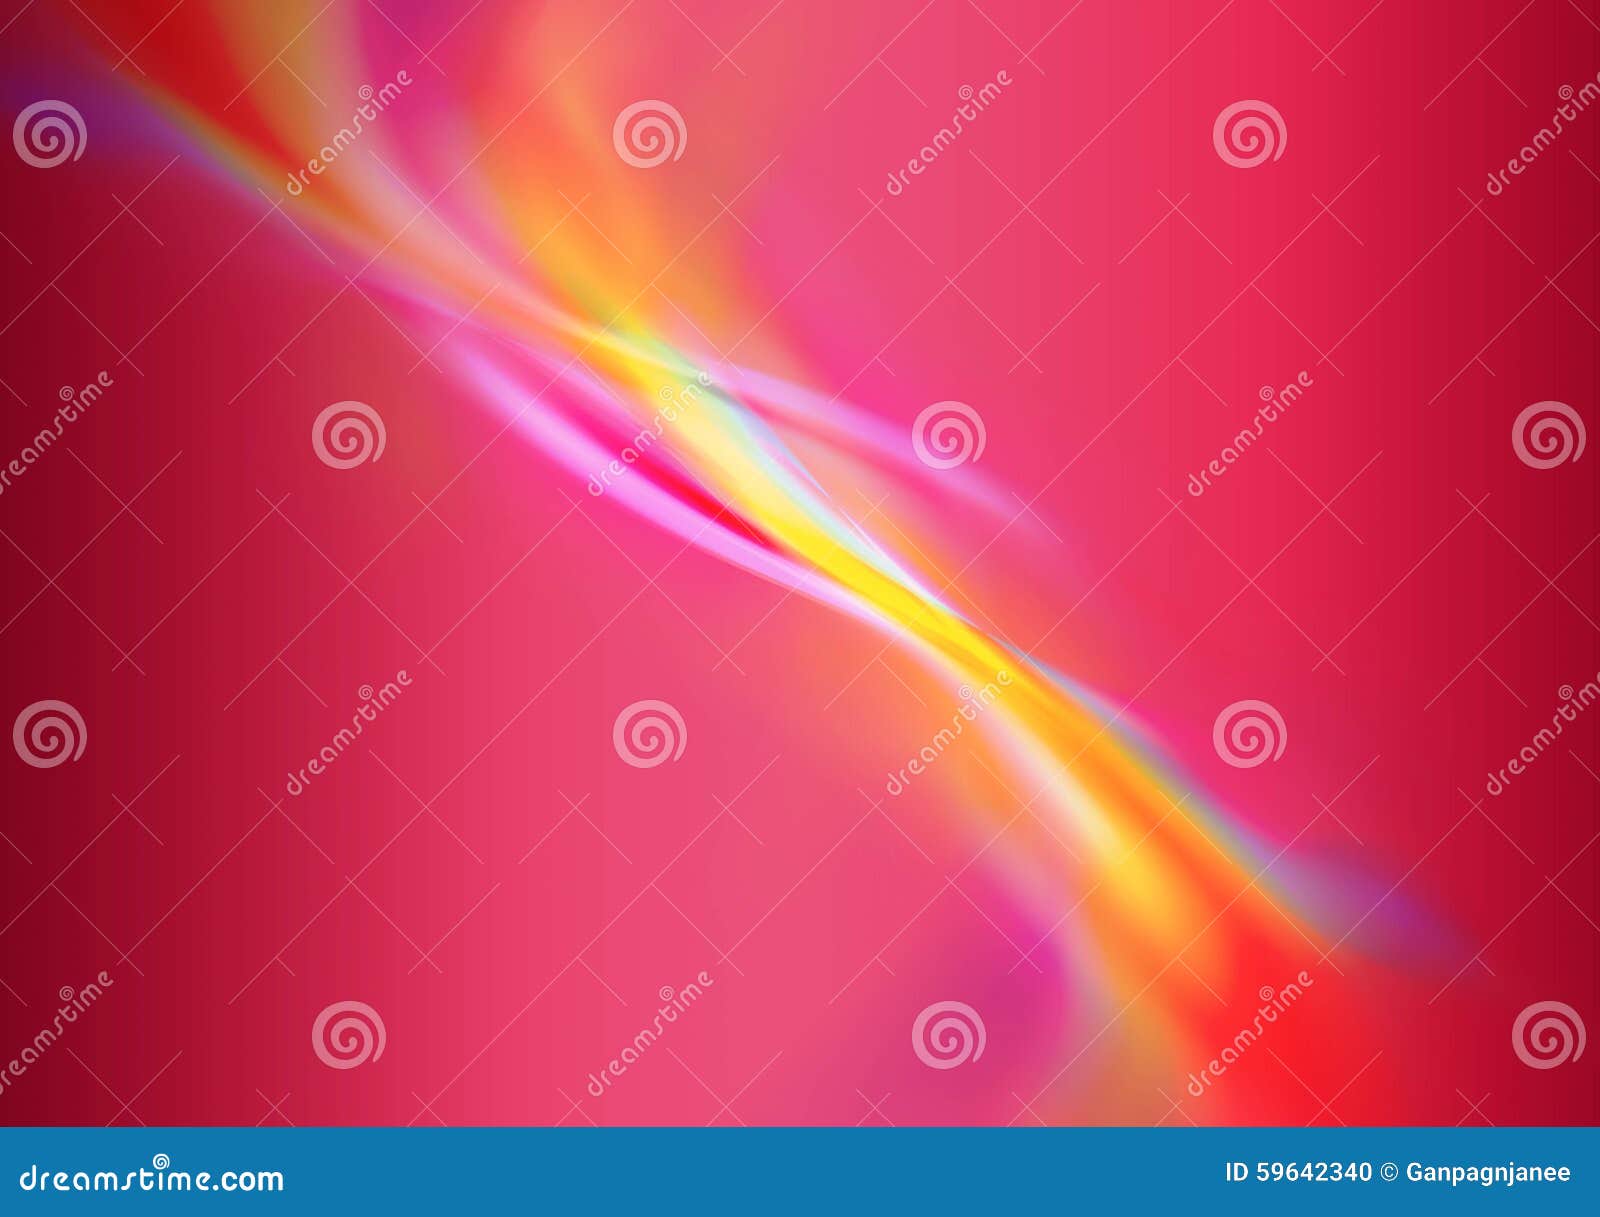 Abstract Colorful on Pink Background Stock Illustration - Illustration